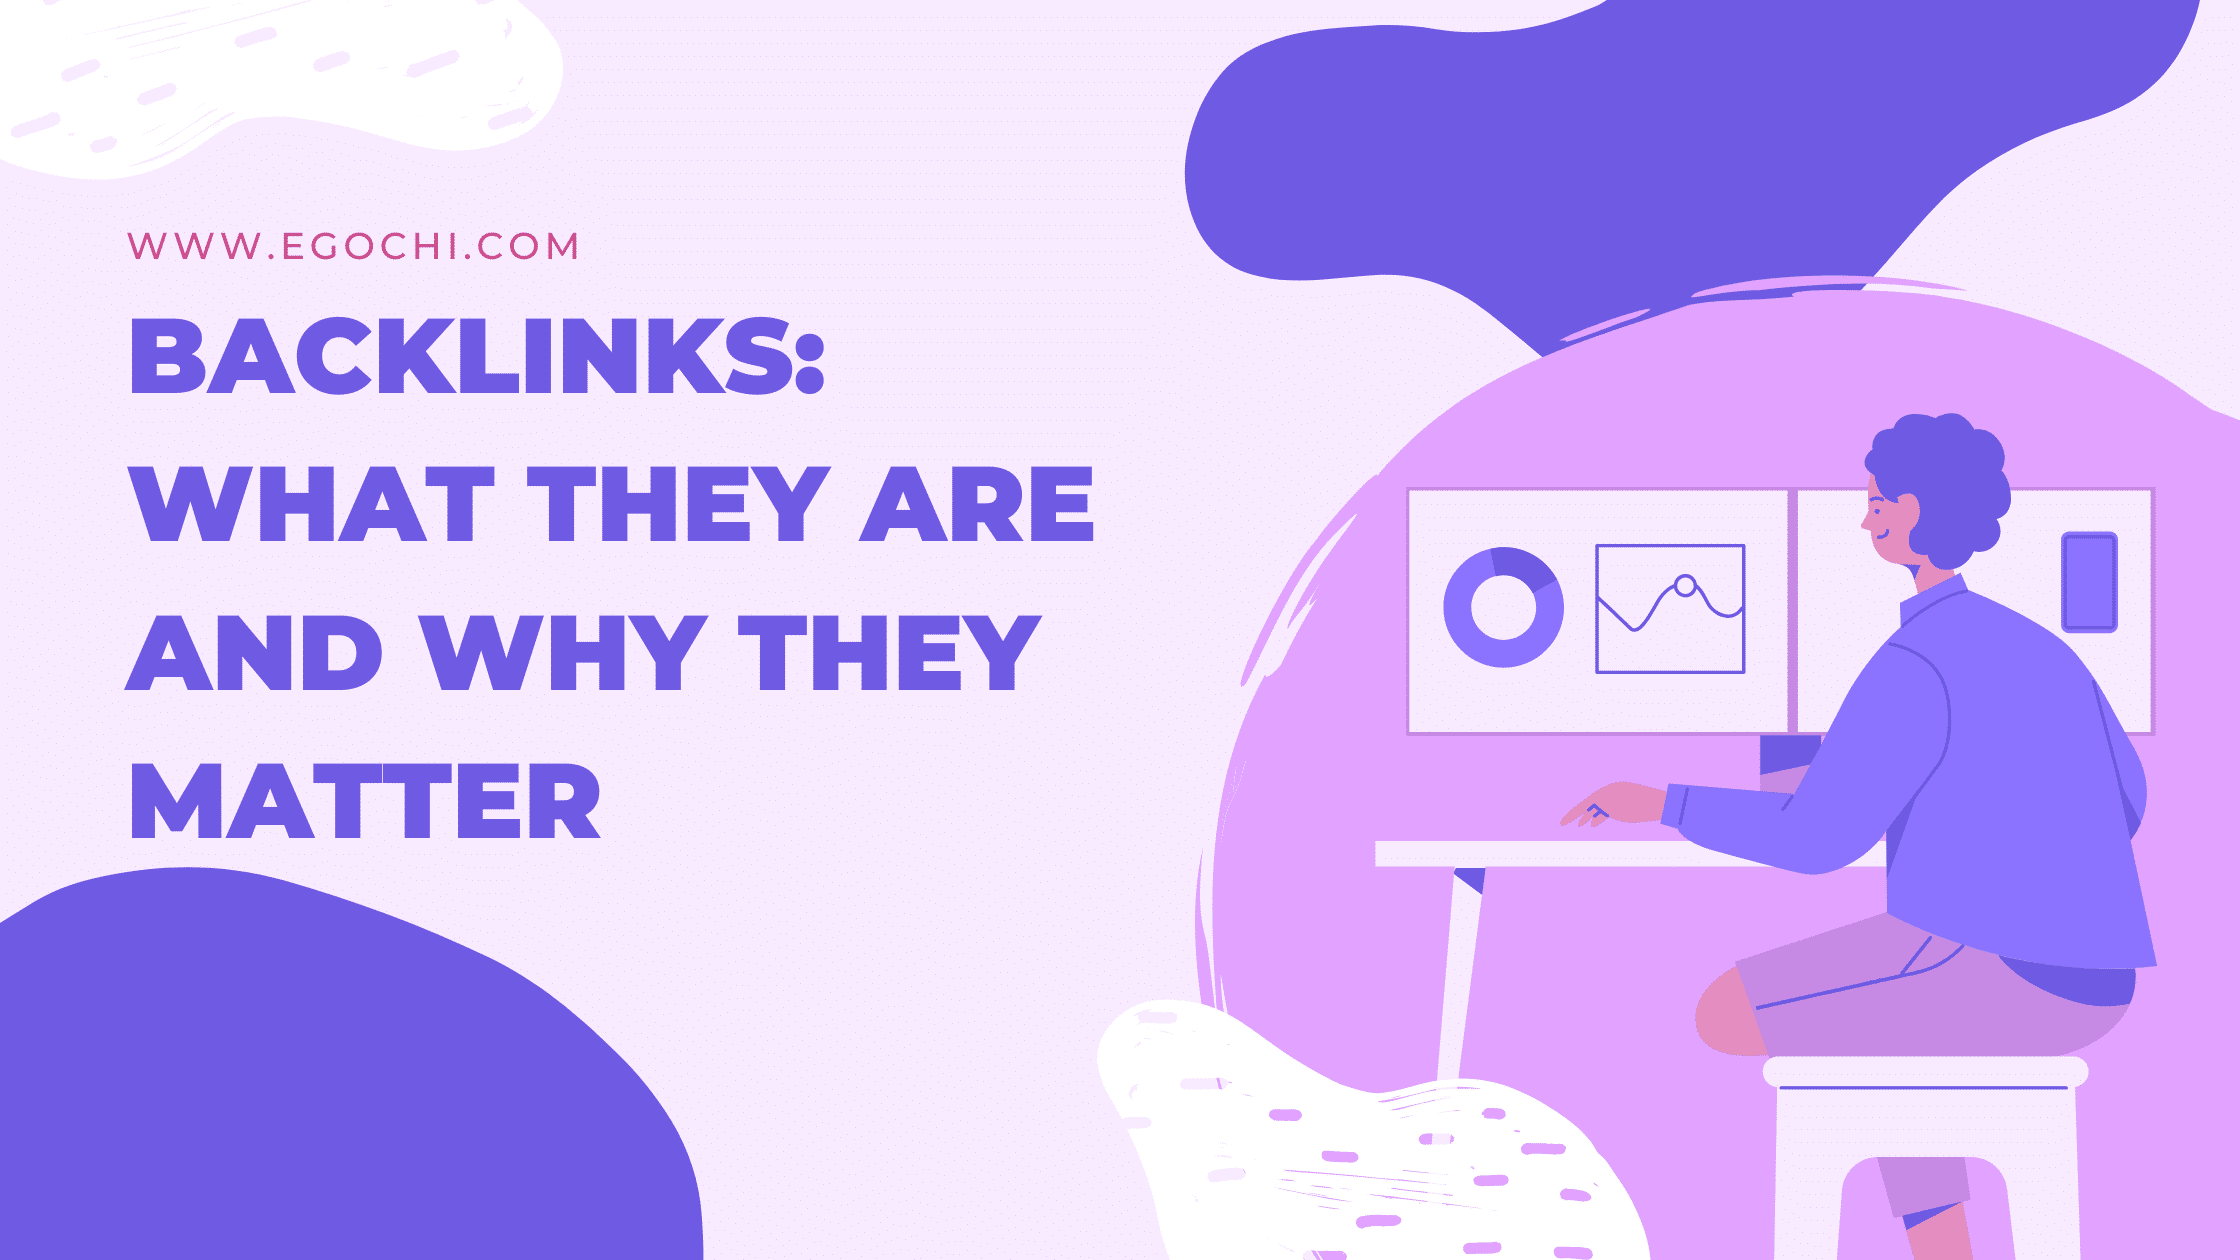 Backlinks: What They Are and Why They Matter